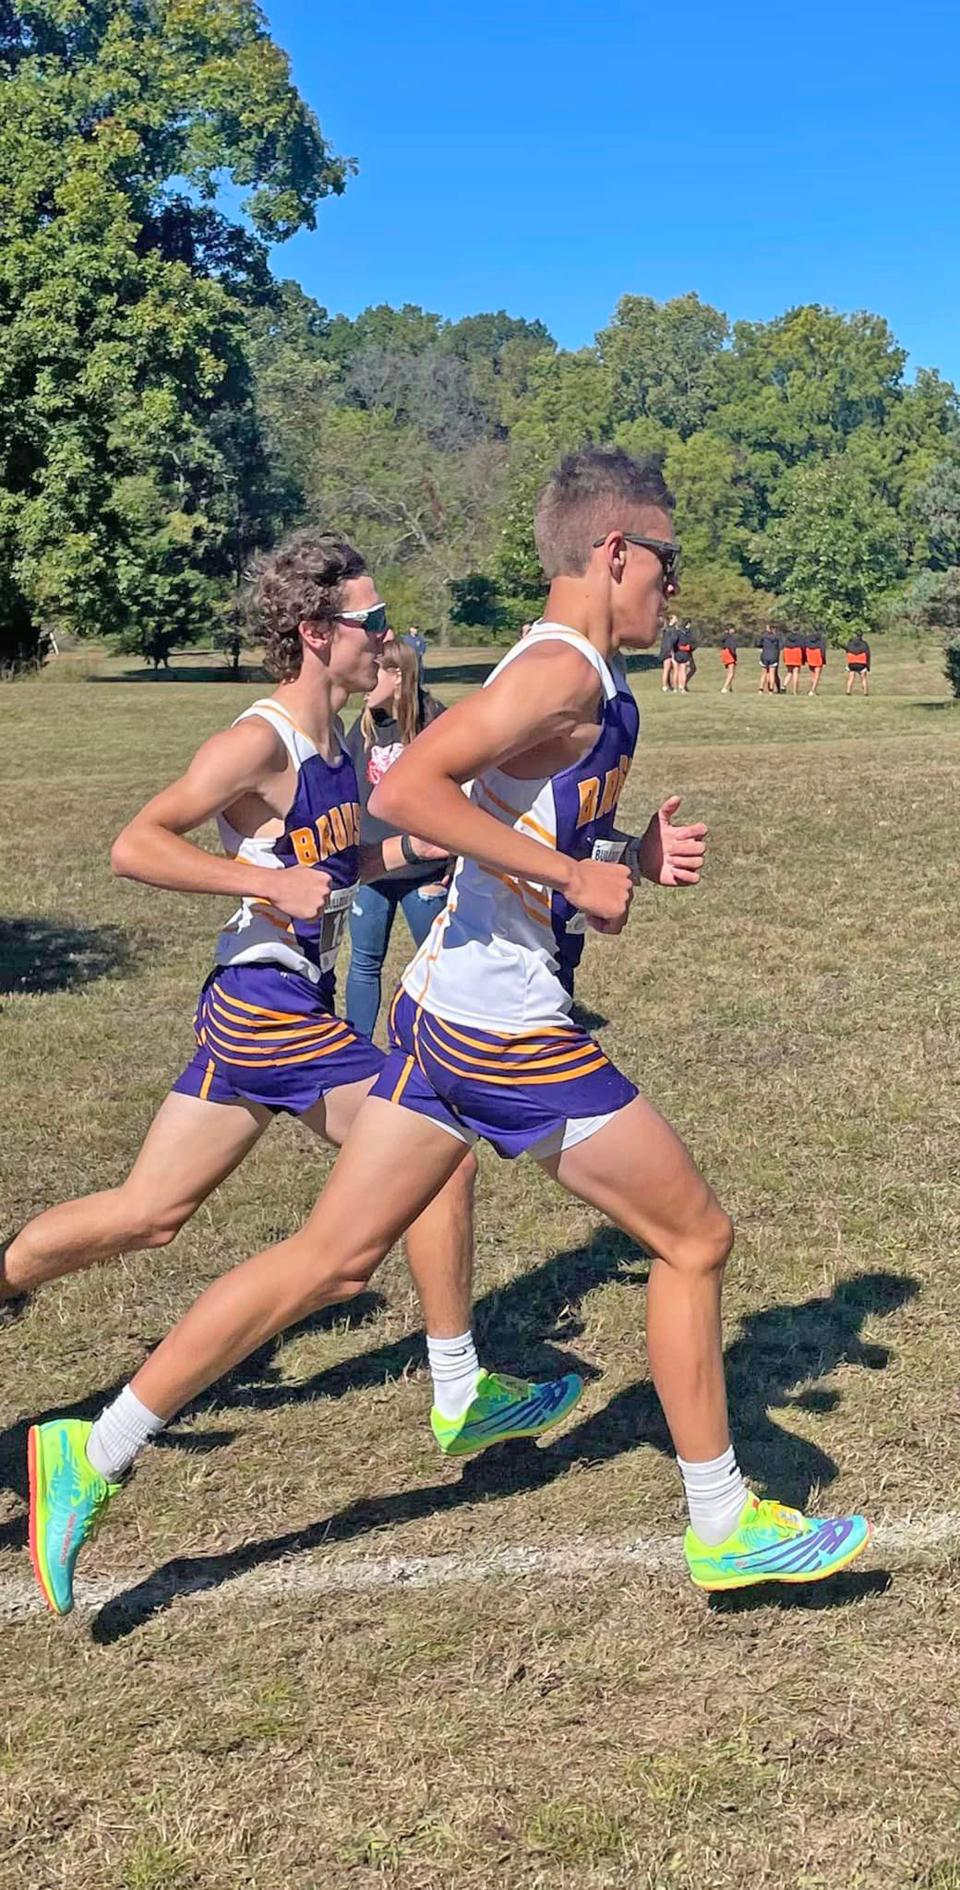 The Bronson duo of Aden Hathaway (right) and Ashton Wells (left) both earned a top 10 finish at Saturday's Otsego Bulldog Invite